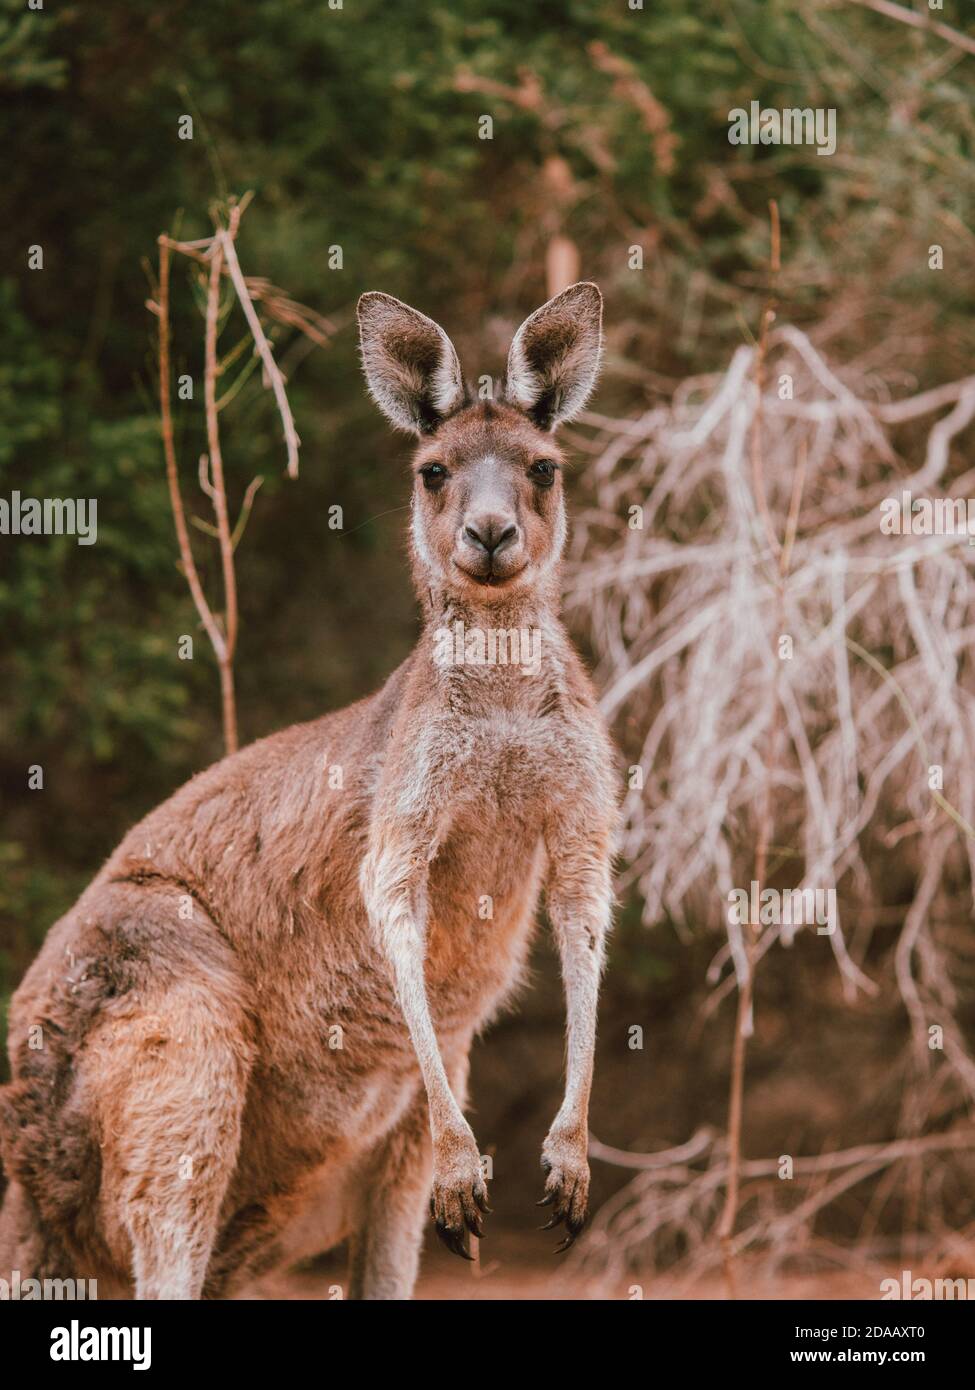 A Wild Kangaroo in Perth, Australia, resting amongst some trees in the summer. Stock Photo